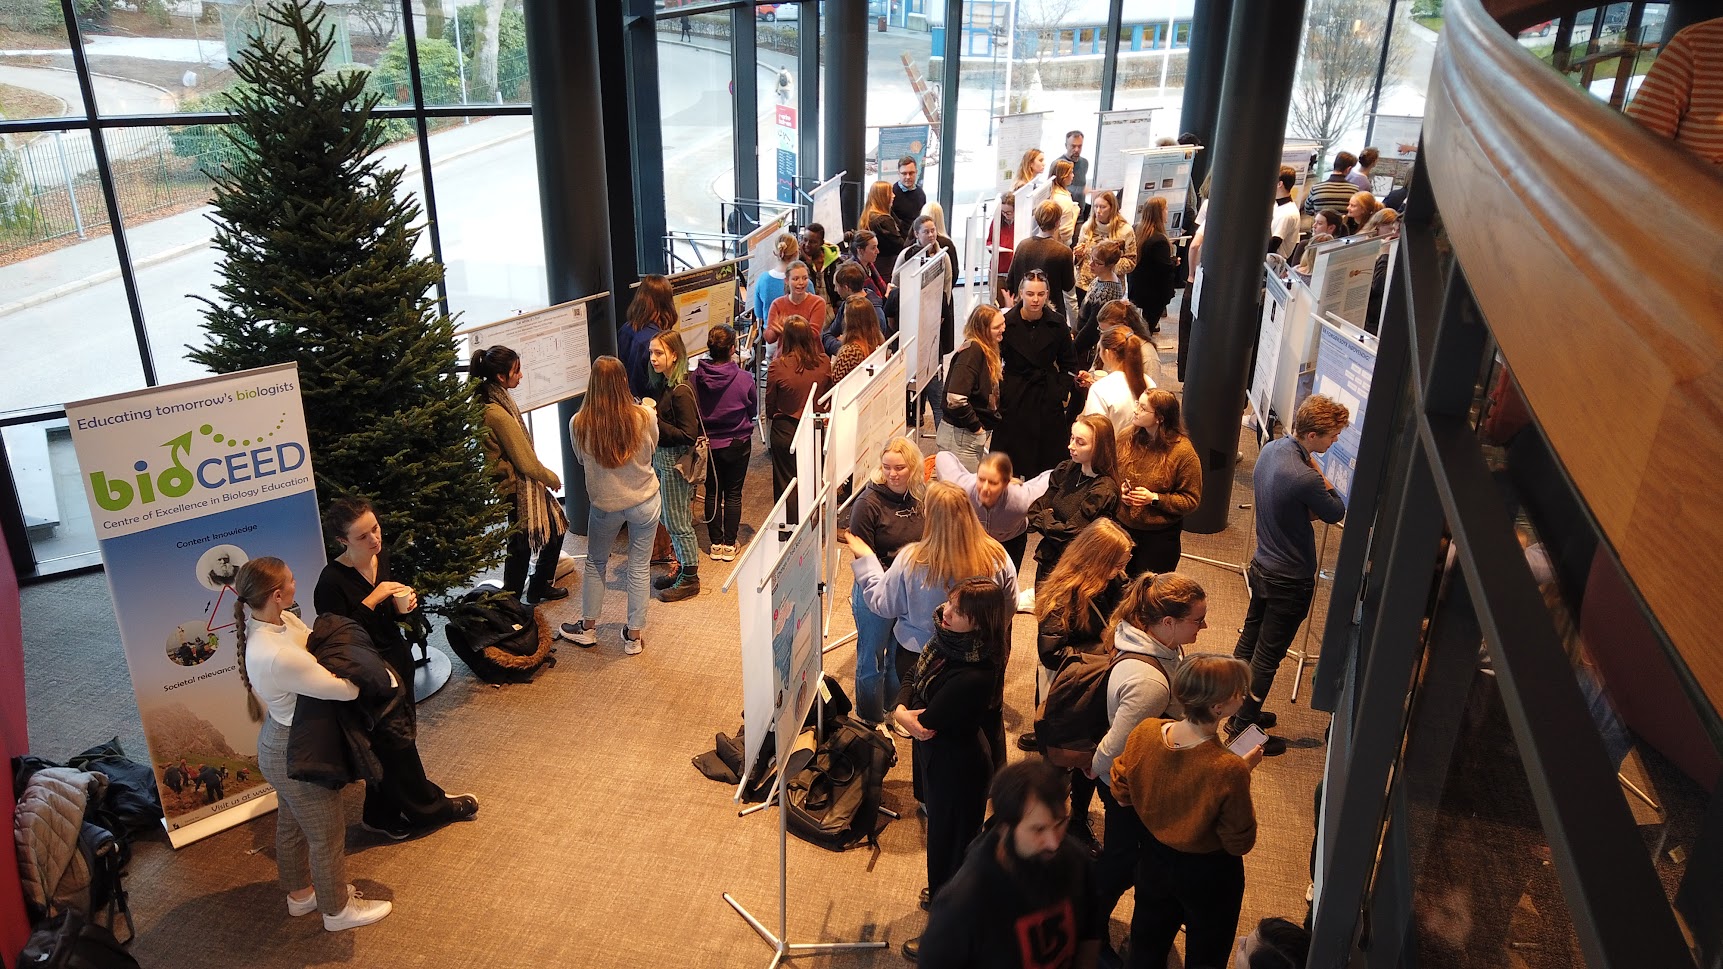 Students gathered at Vilvite for the poster symposium